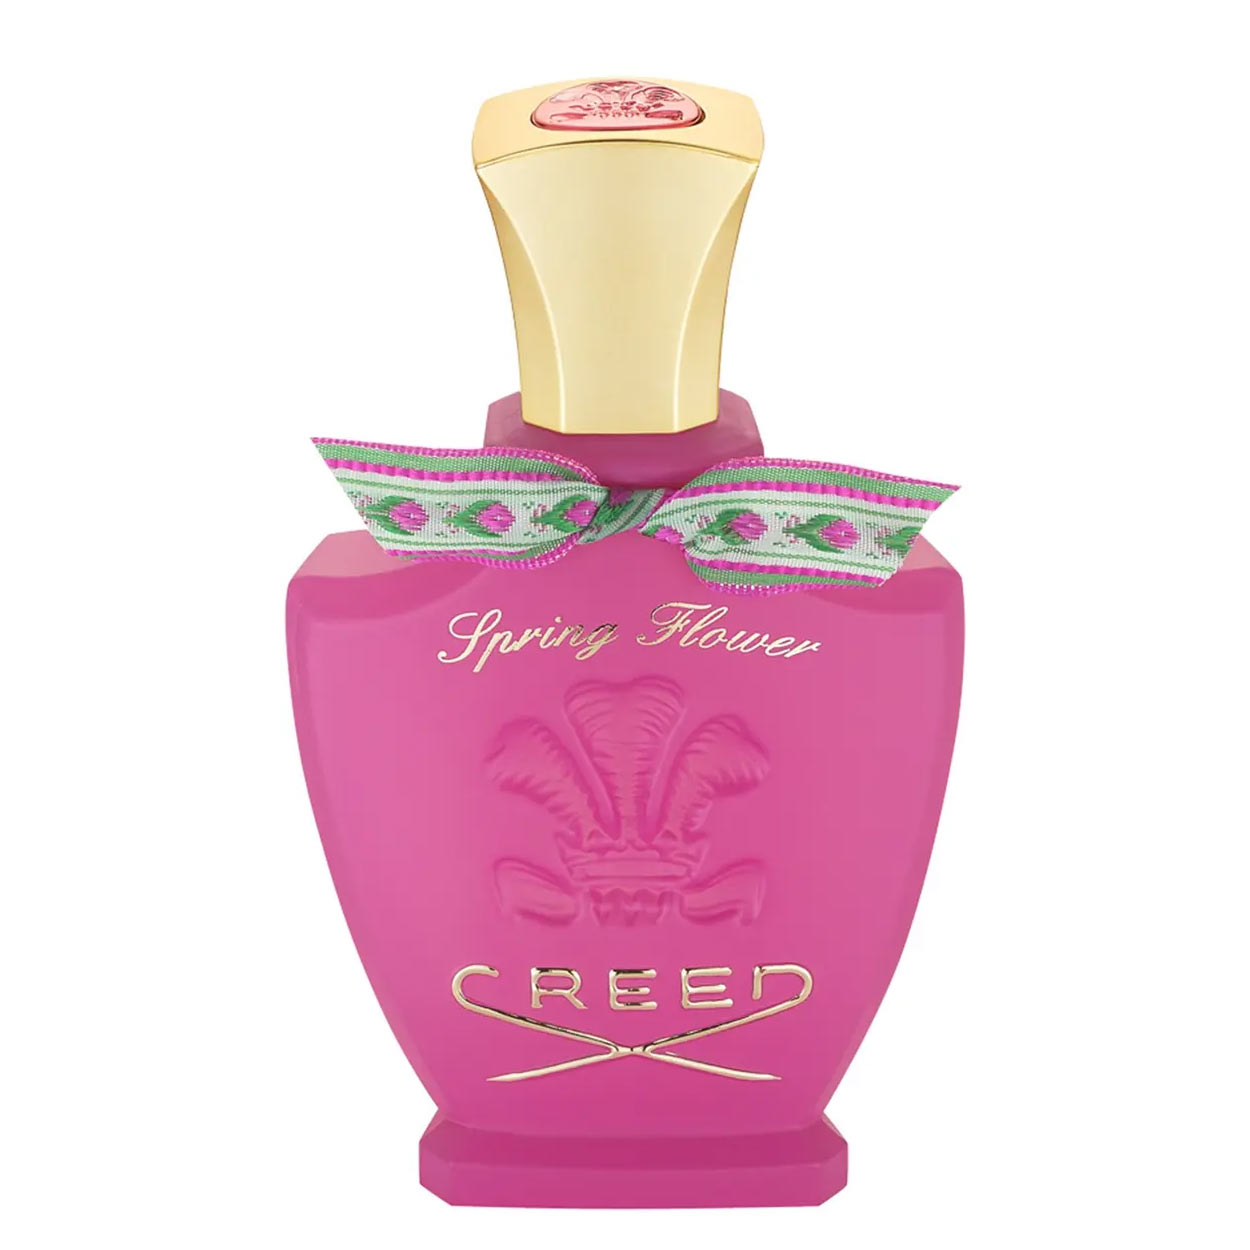 Creed Spring Flower Creed Image